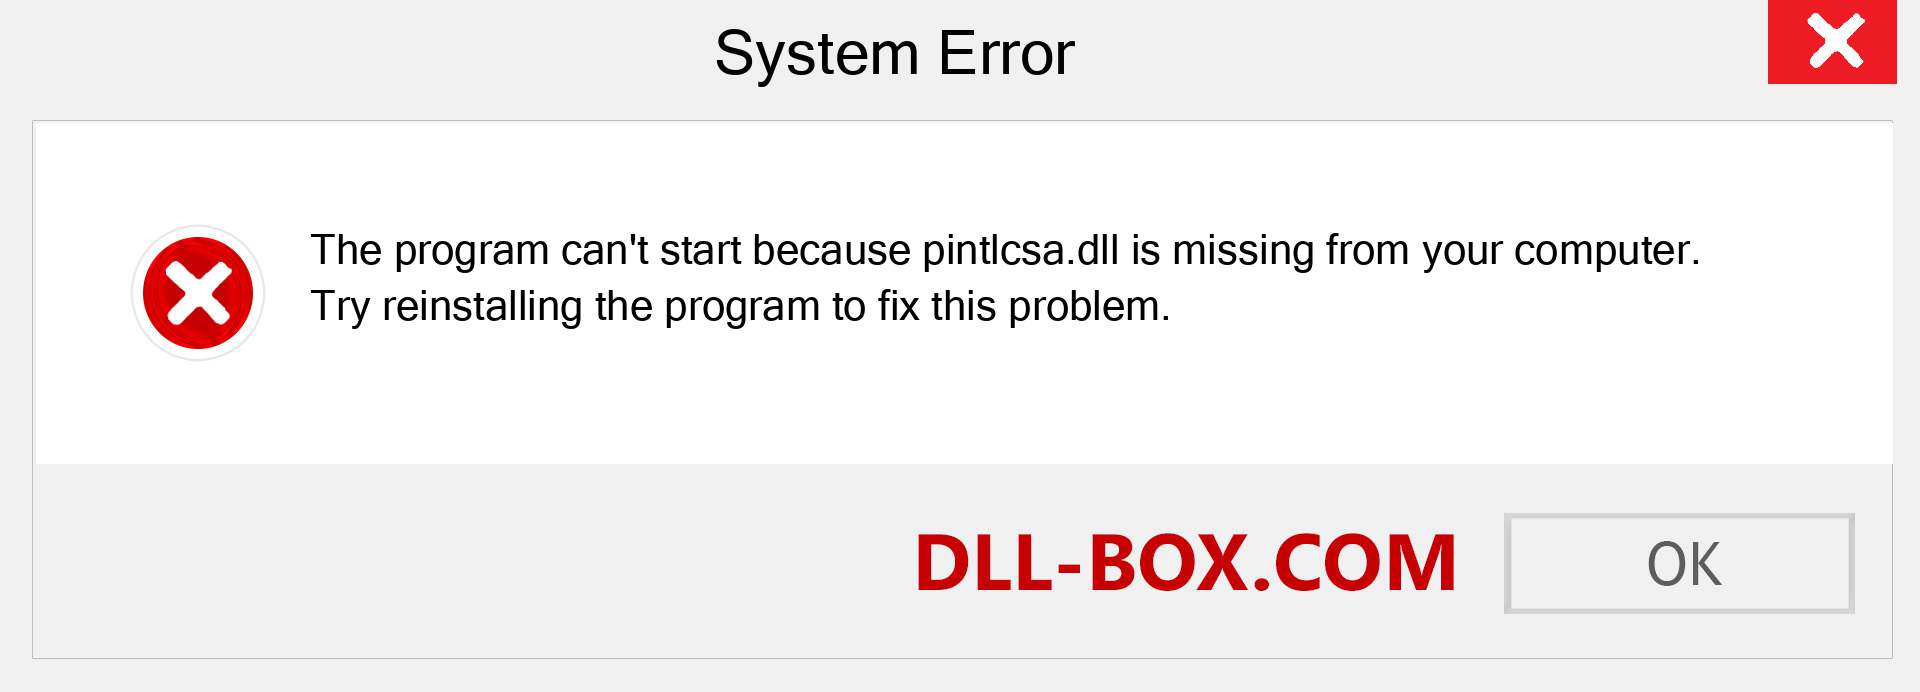  pintlcsa.dll file is missing?. Download for Windows 7, 8, 10 - Fix  pintlcsa dll Missing Error on Windows, photos, images